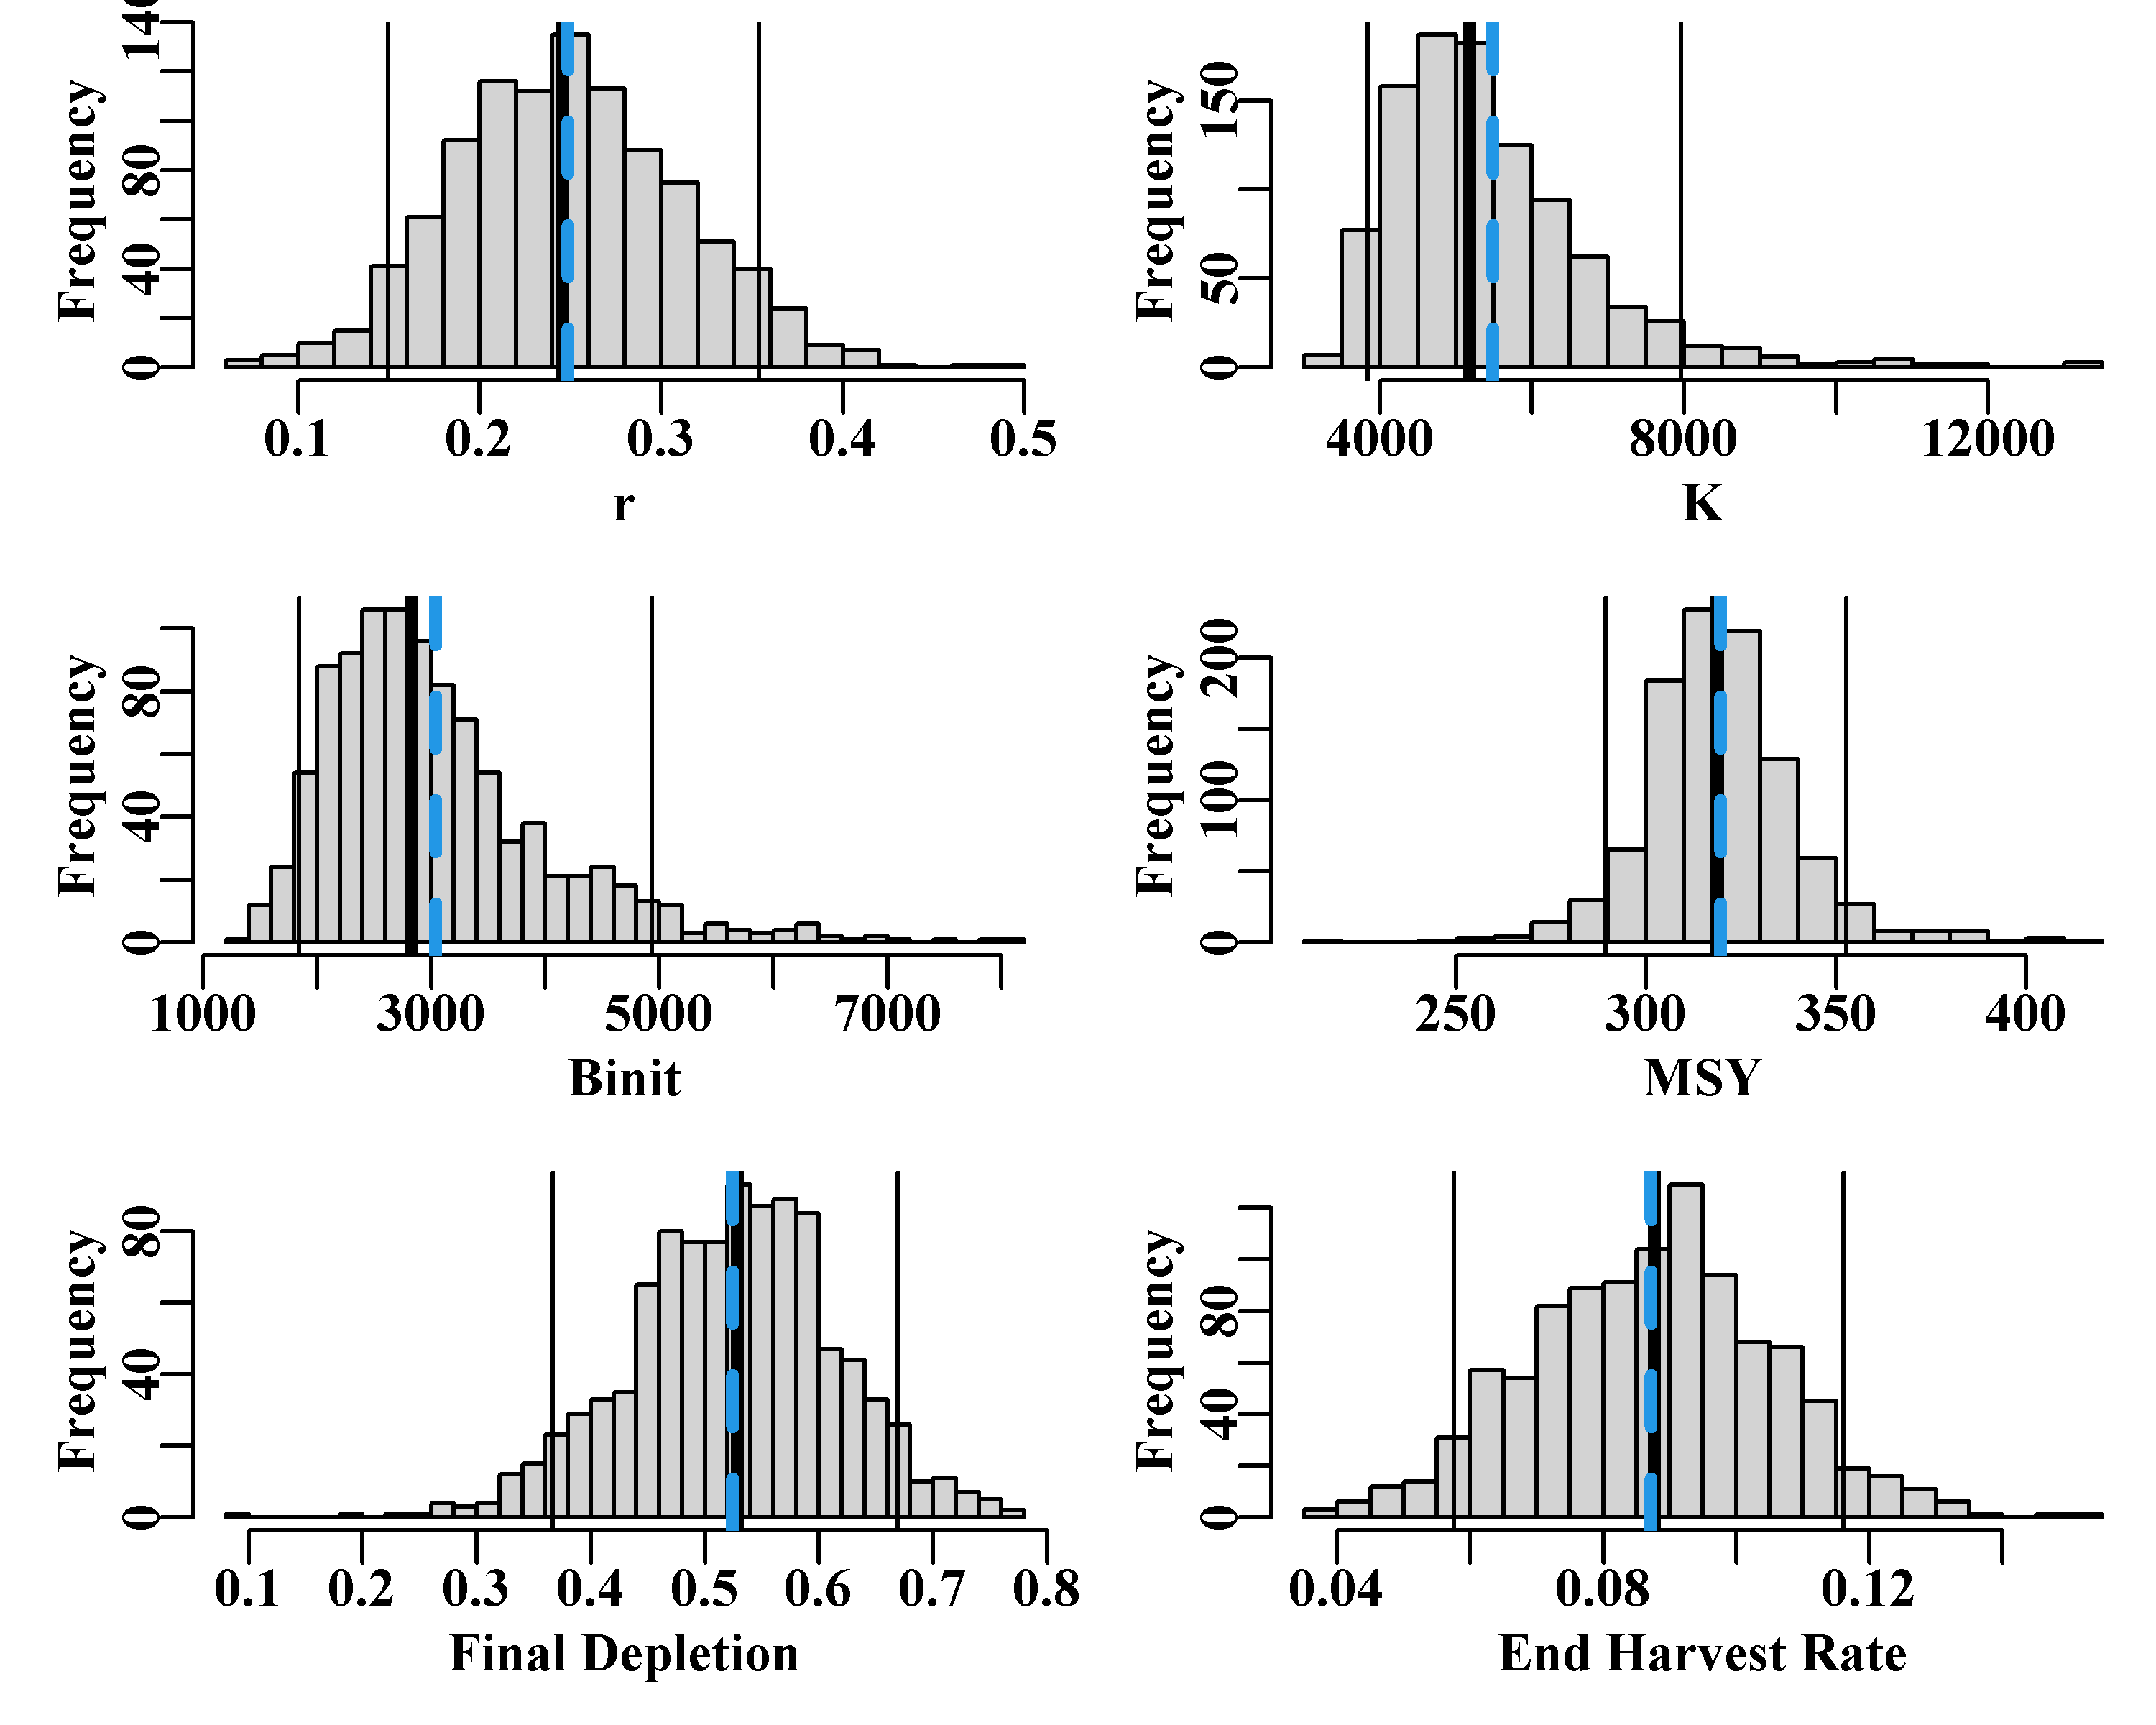 The 1000 bootstrap replicates from the optimum spm fit to the dataspm data-set. The vertical lines, in each case, are the median and 90th percentile confidence intervals and the dashed vertical blue lines are the mean values. The function uphist() is used to expand the x-axis in K, Binit, and MSY.